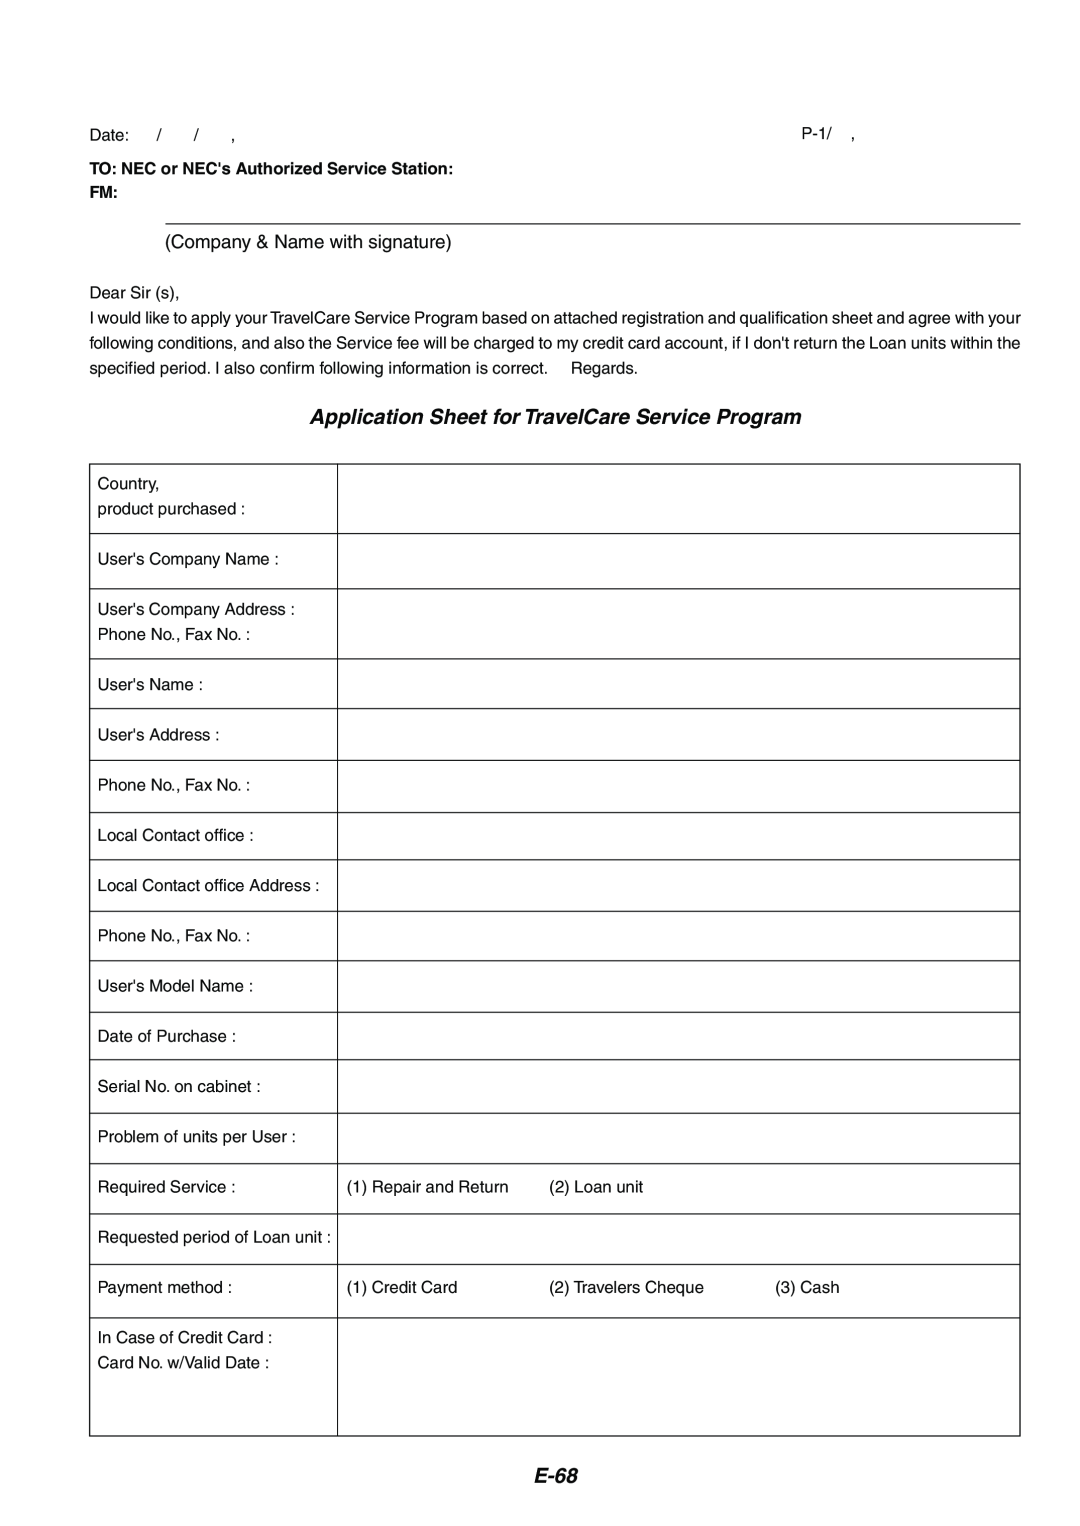 NEC MT1075/MT1065 user manual Application Sheet for TravelCare Service Program, E-68, Company & Name with signature 